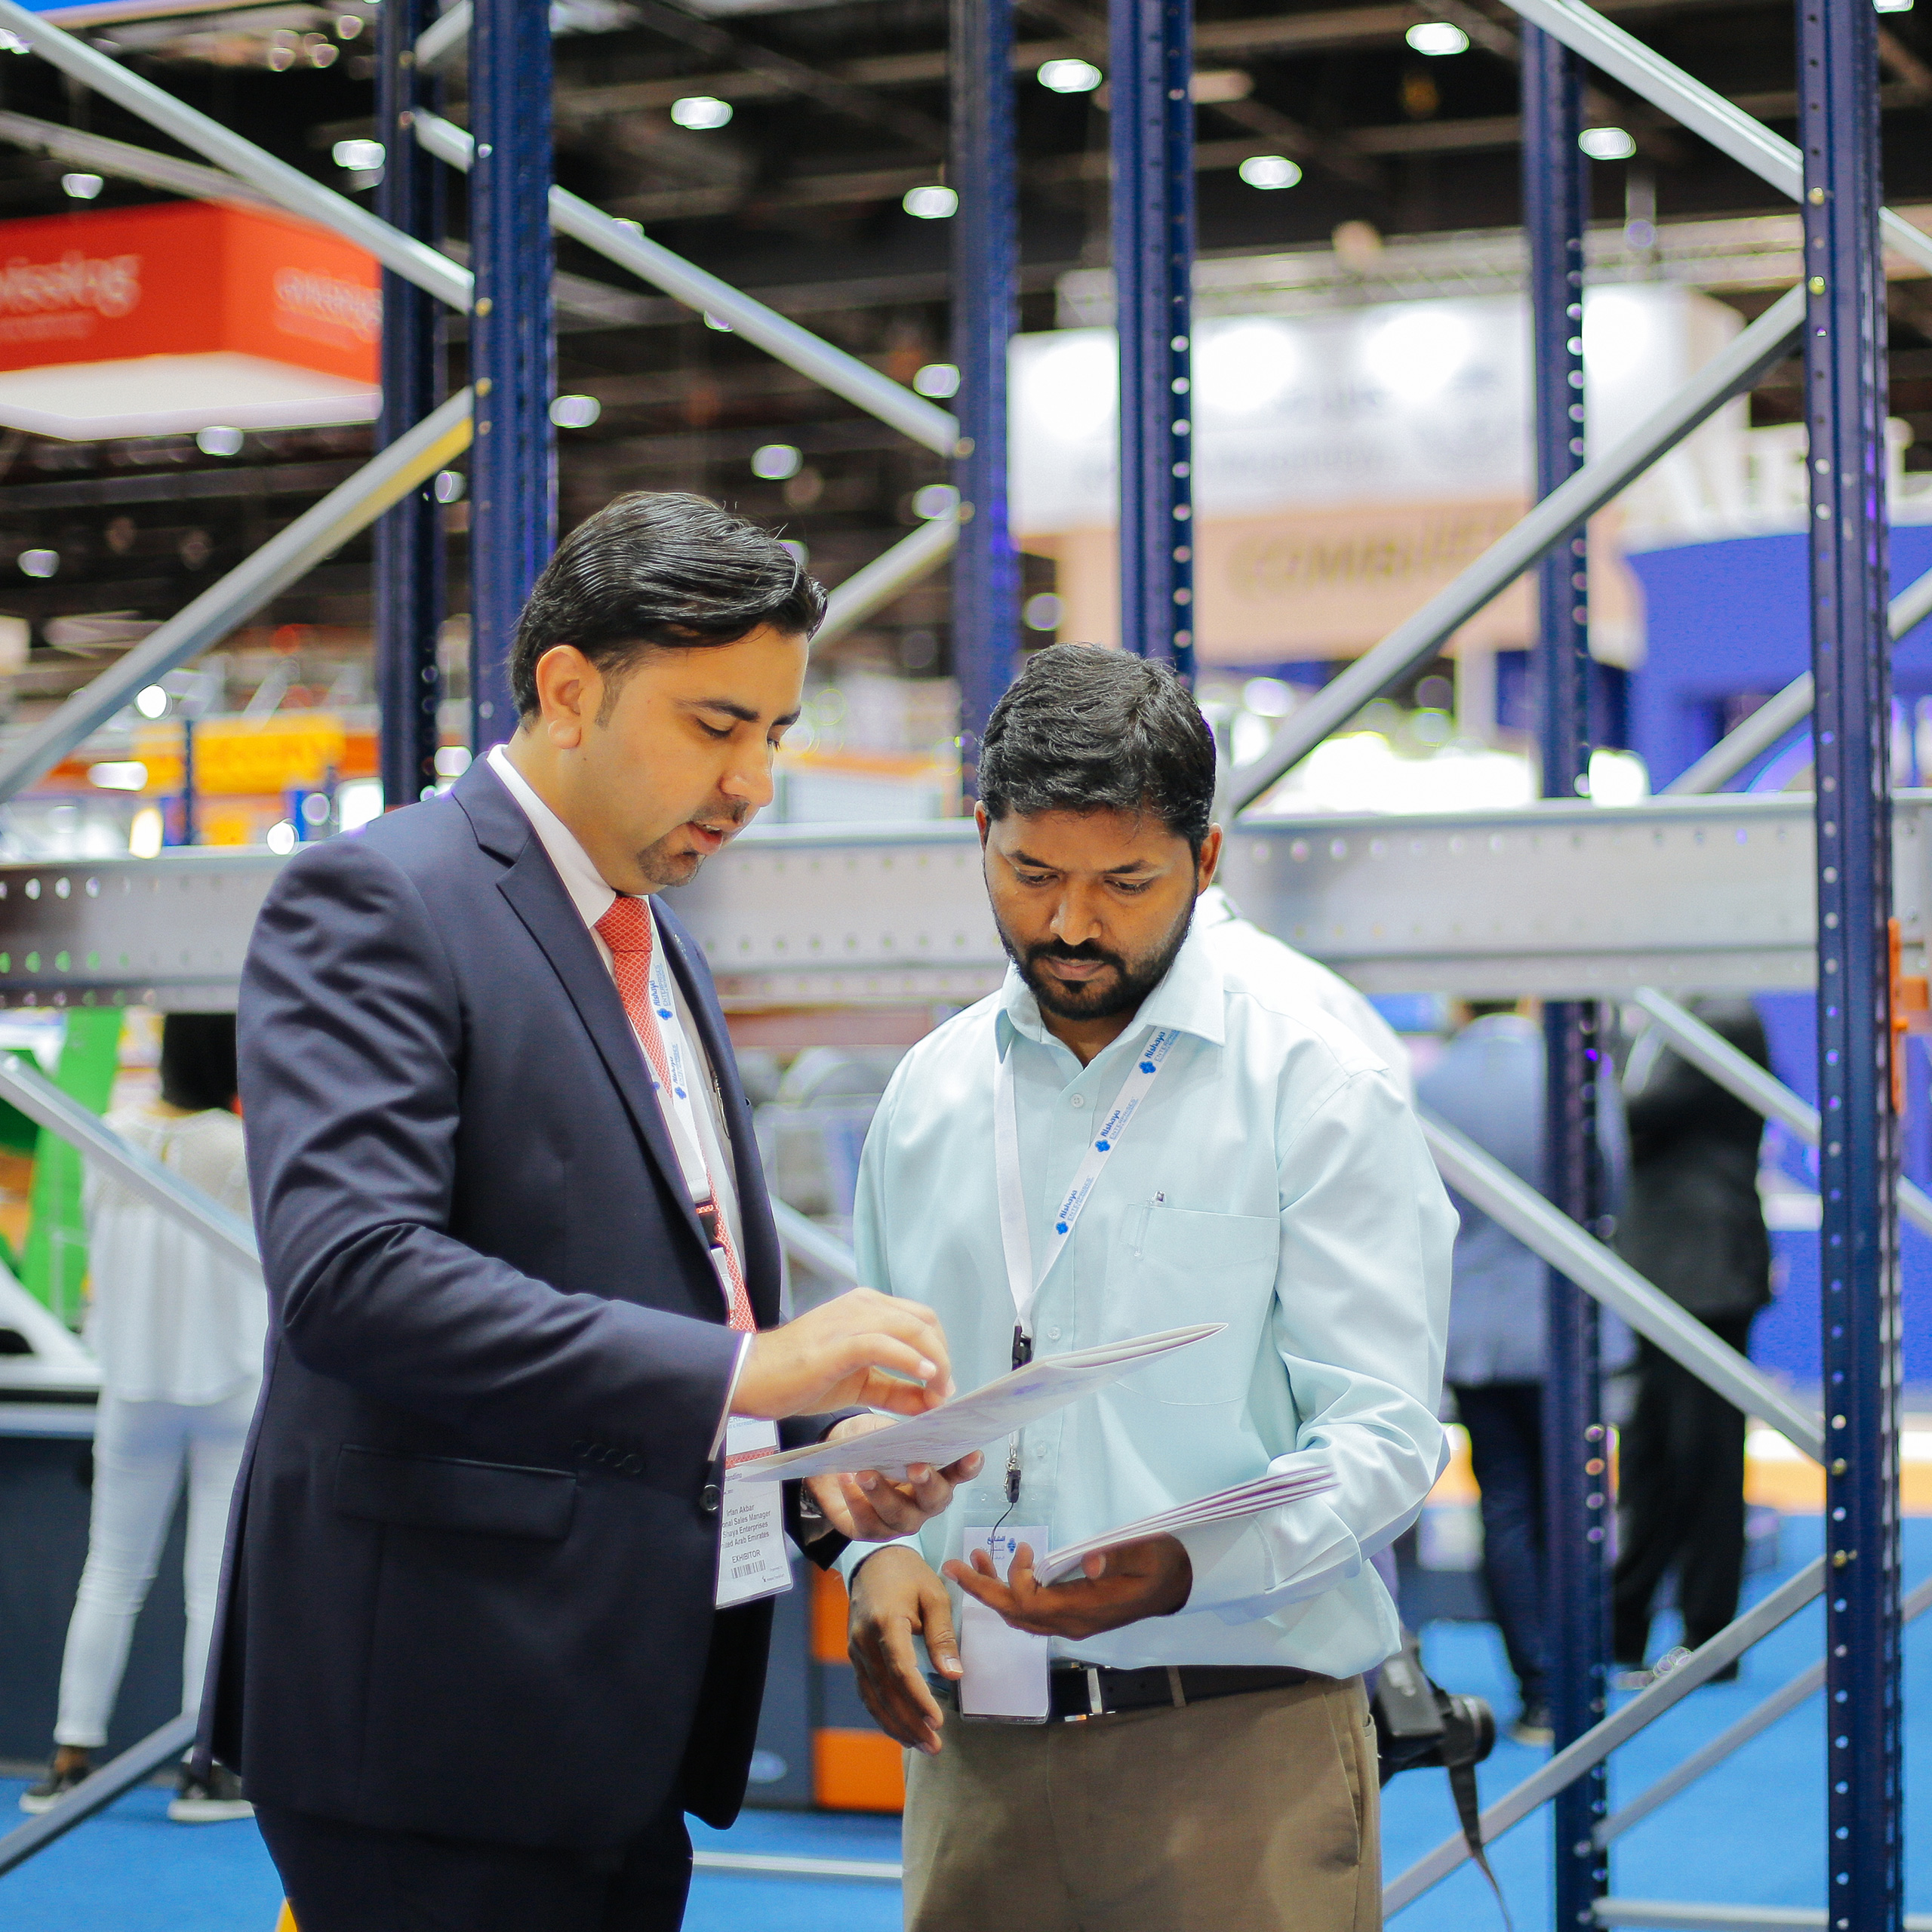 Materials Handling Middle East - Robotics & Automation to transform Middle East’s warehousing & inventory control